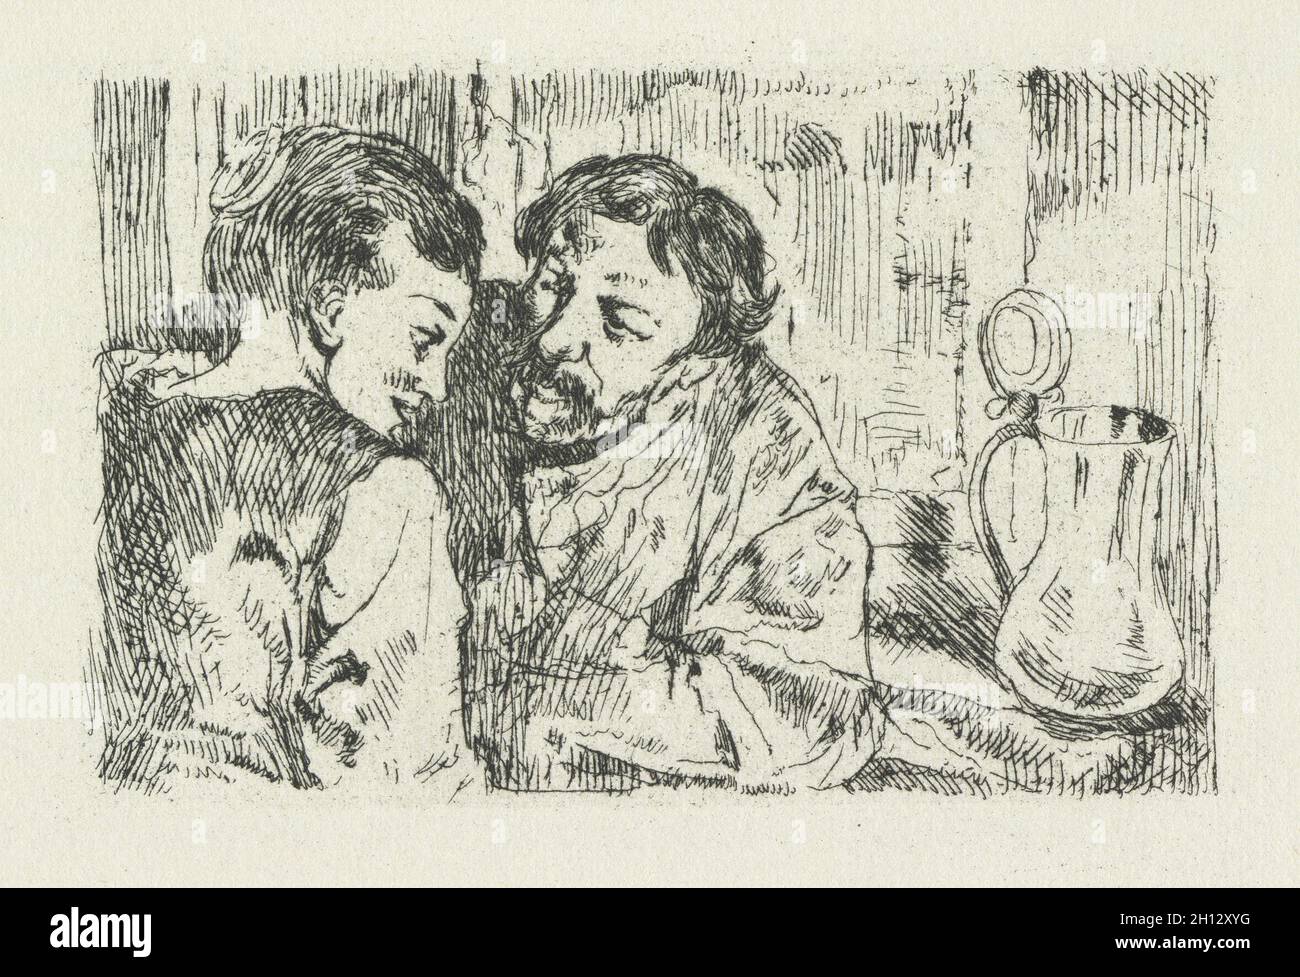 Le Drageoir aux épices by J. K. Huysmans: p. 120, 1929. Auguste Brouet (French, 1872-1941), J.K. Huysmans (French). Book containing 54 etchings; overall: 28.7 x 23.3 x 4.5 cm (11 5/16 x 9 3/16 x 1 3/4 in.). Stock Photo